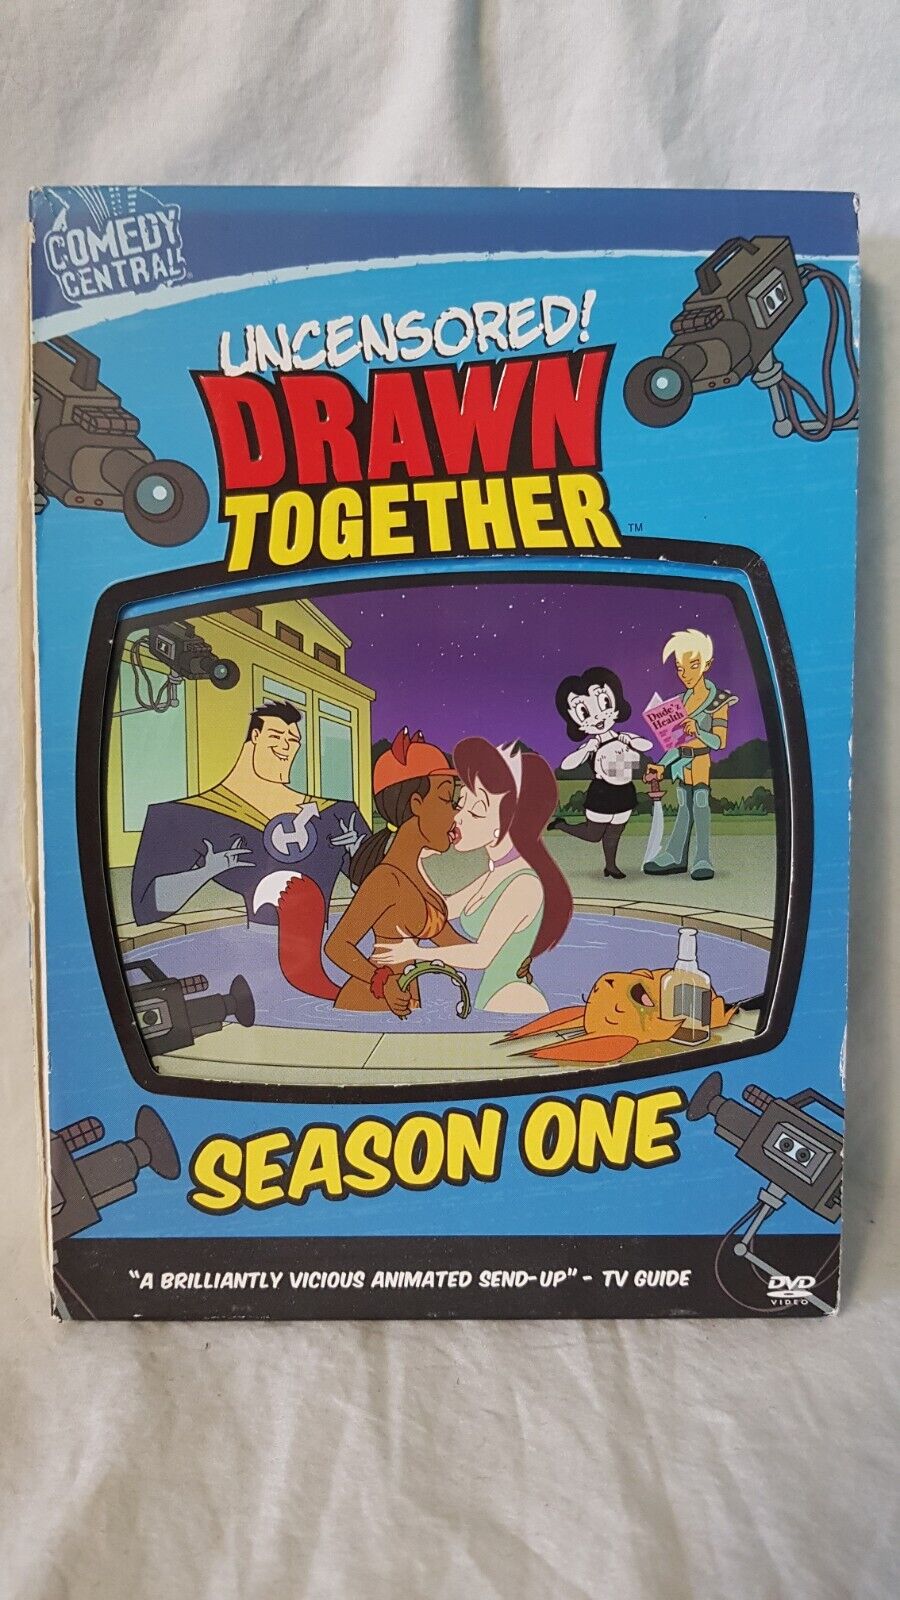 diana parsons recommends drawn together uncensensored episodes pic